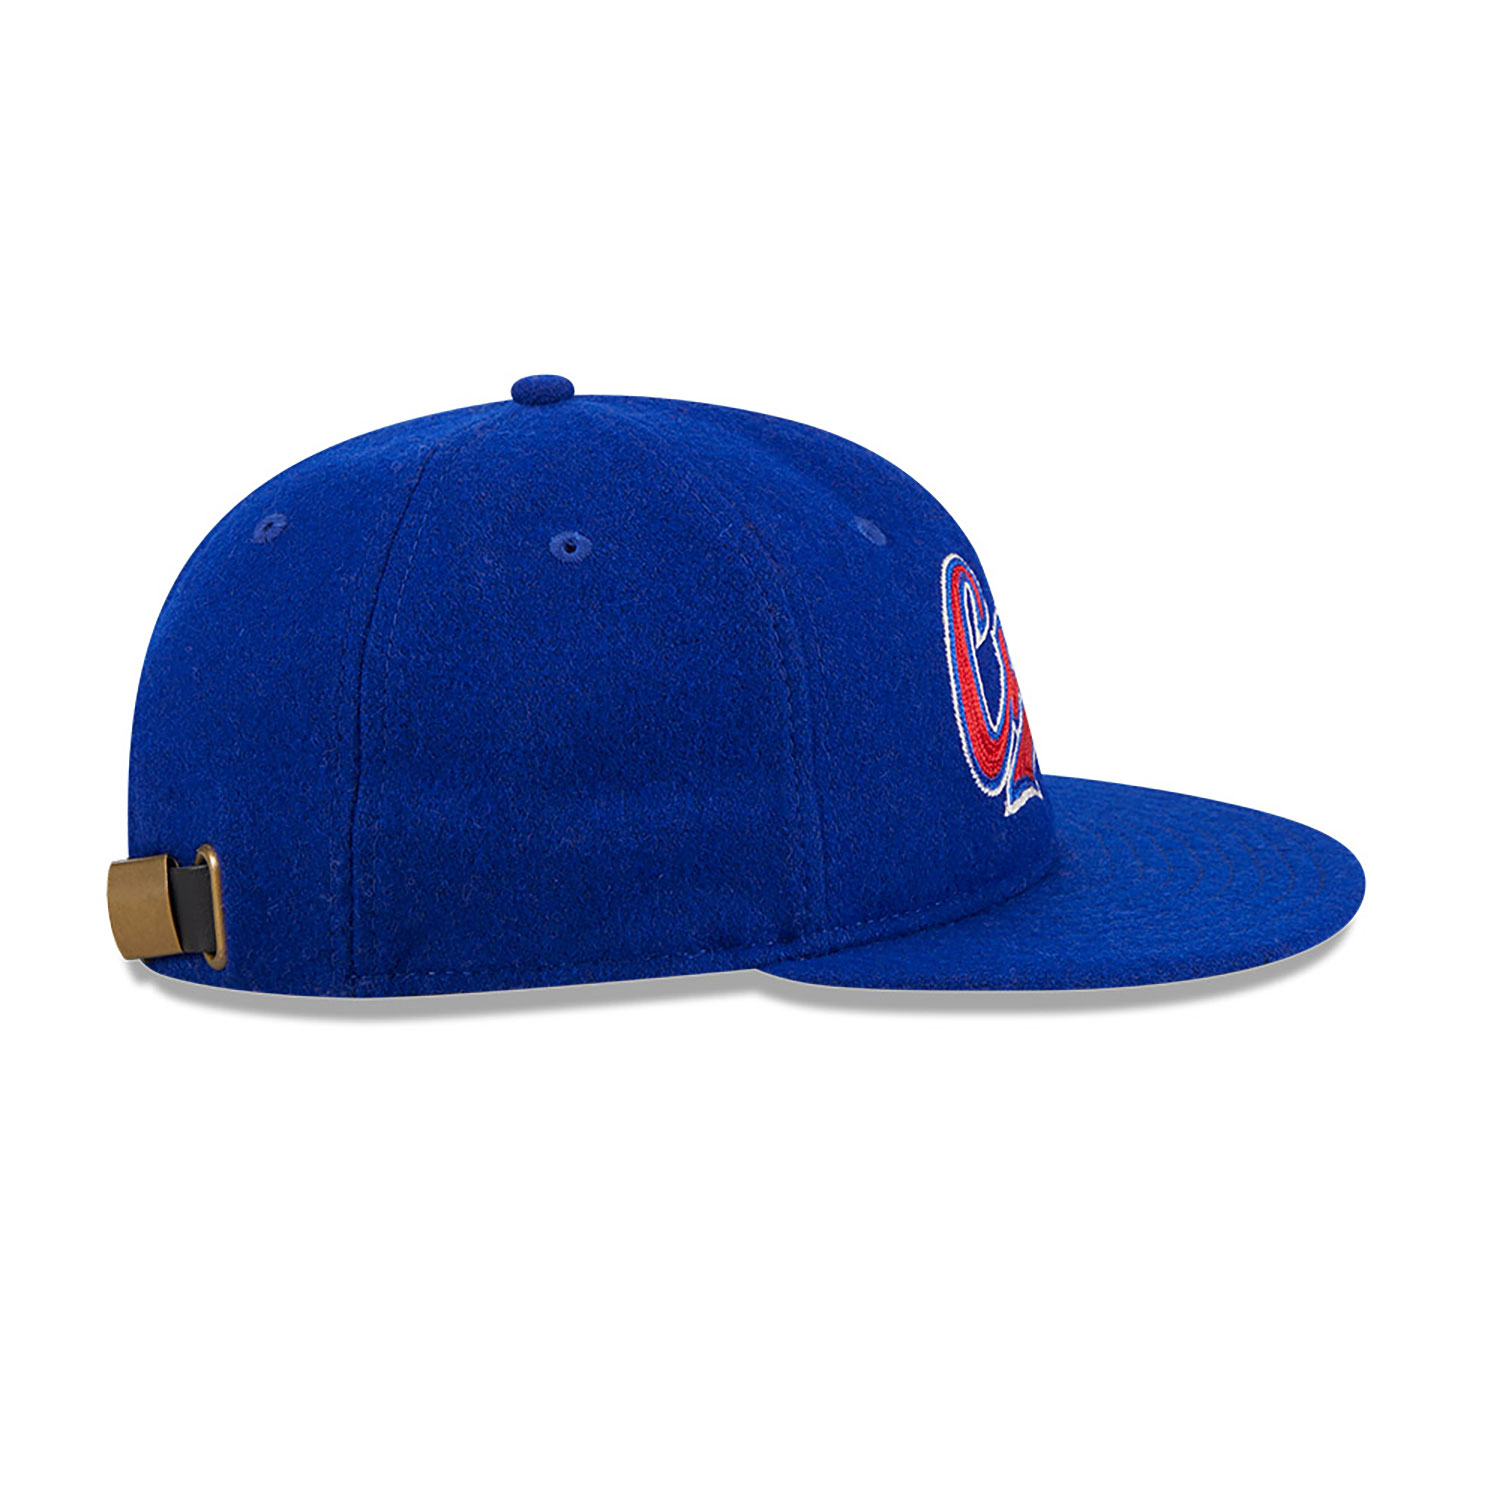 Chicago Cubs Melton Wool Blue Retro Crown 9FIFTY Strapback Cap